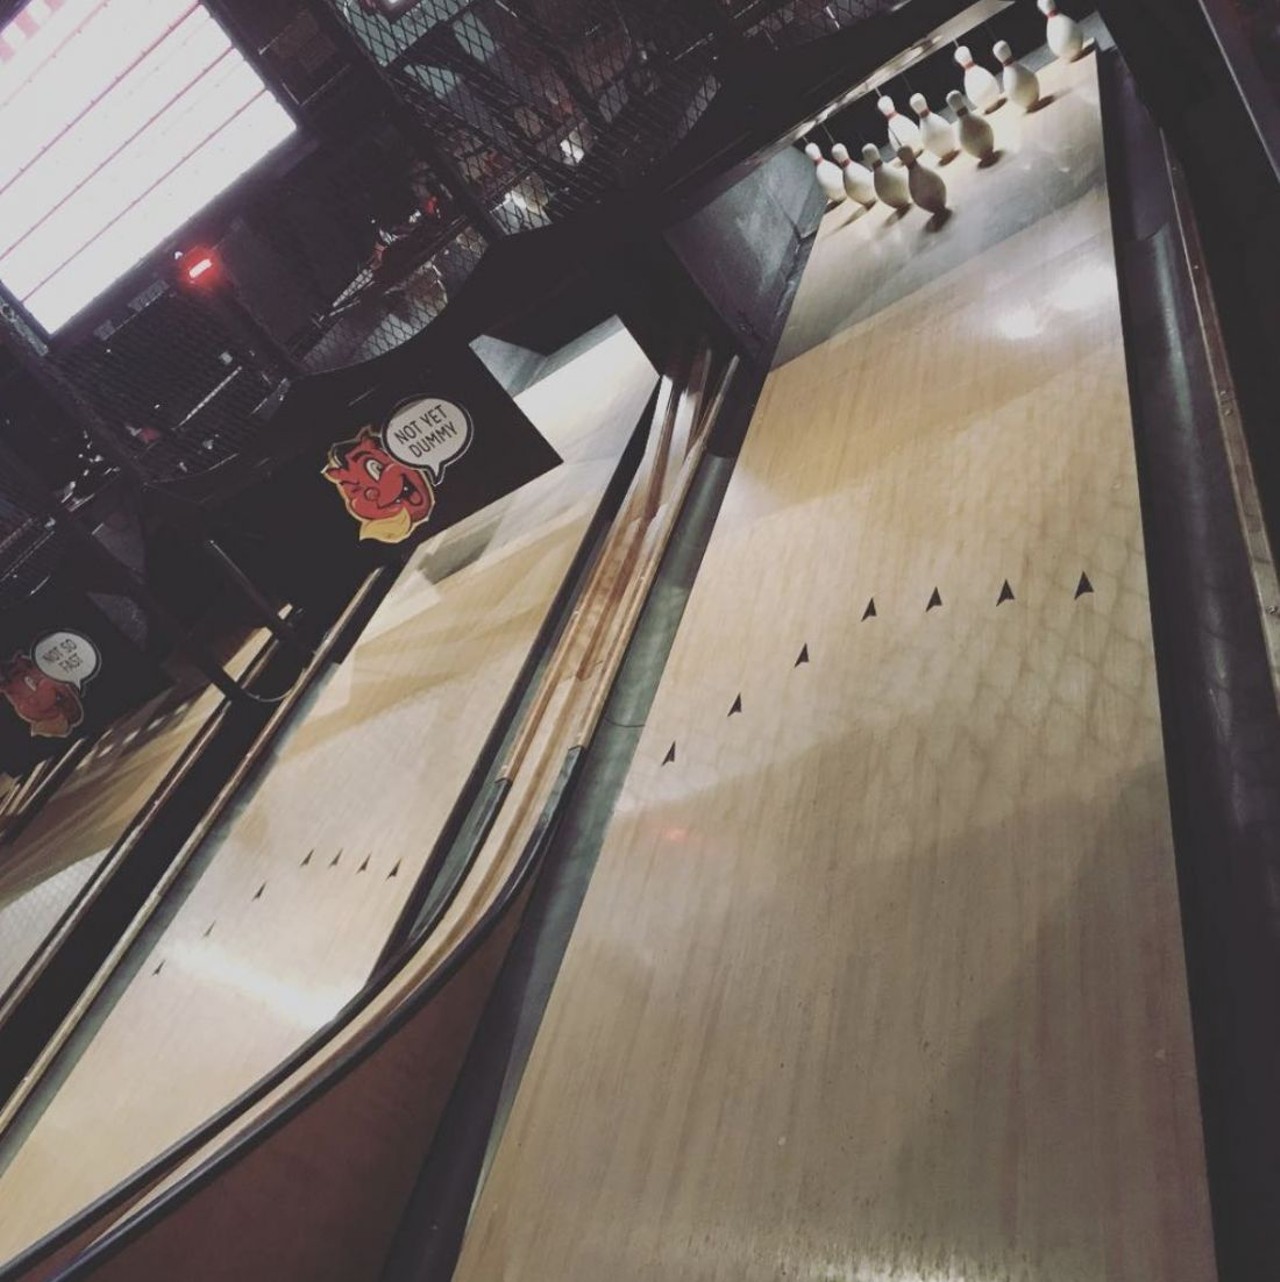  Duckpin Bowling
Hi and Dry, 2221 Professor Ave., Cleveland
Yeah, regular bowling is fun, but why not try something new. Duckpin Bowling gives you three turns per frame, on shorter lanes, with smaller balls. So if you&#146;re not so good at the real thing, this place is perfect to not embarrass yourself. 
Photo via @HiAndDryCle/Instagram